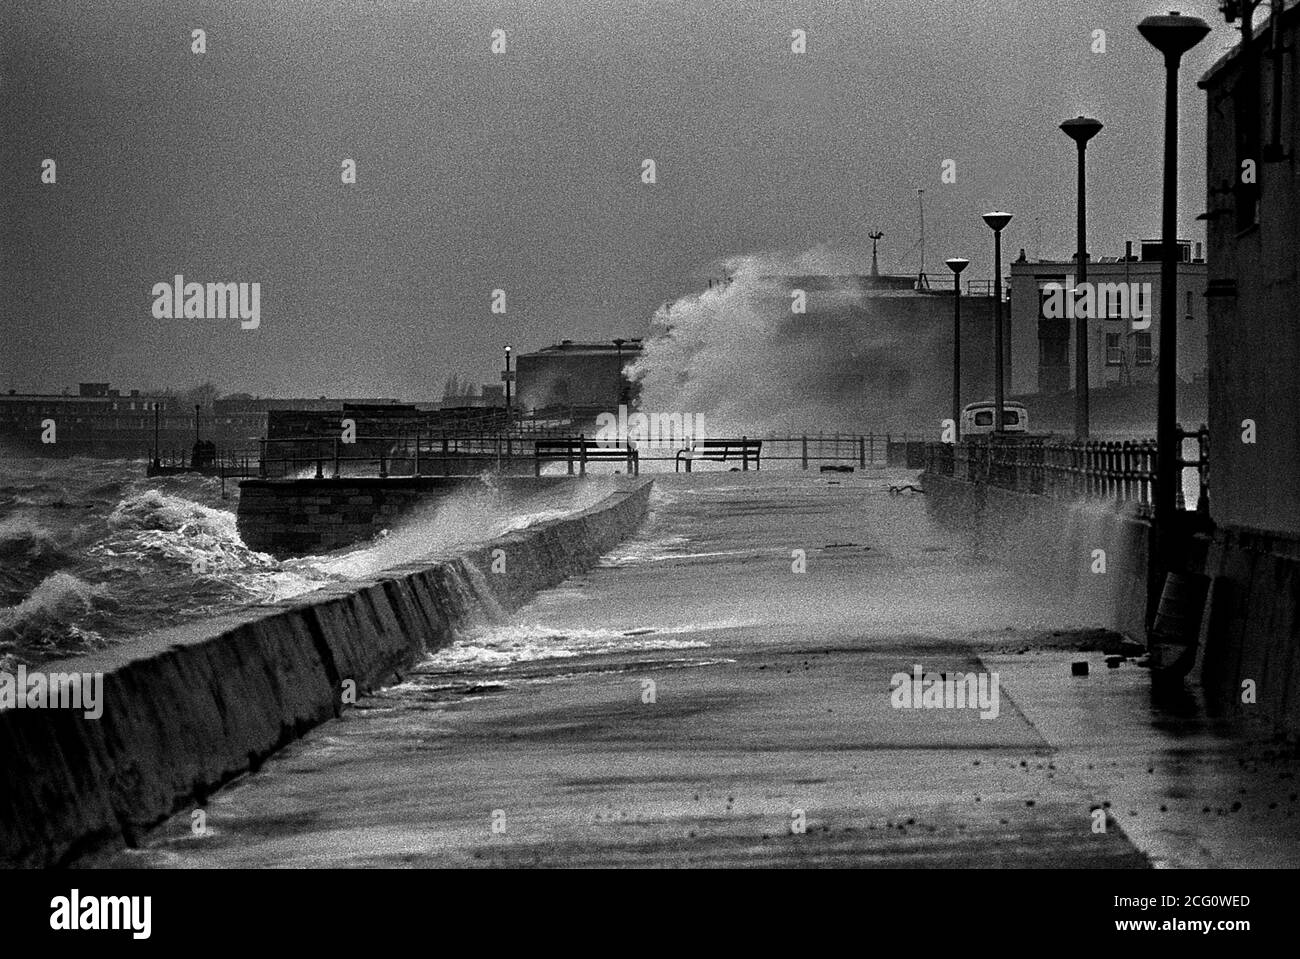 AJAXNETPHOTO. 1974. OLD PORTSMOUTH, ENGLAND. - GALE FORCE - HIGH WINDS AND STORMY SEAS BATTER OLD PORTSMOUTH HOT WALLS. PHOTO:JONATHAN EASTLAND/AJAX REF:7406 7 28 Stock Photo